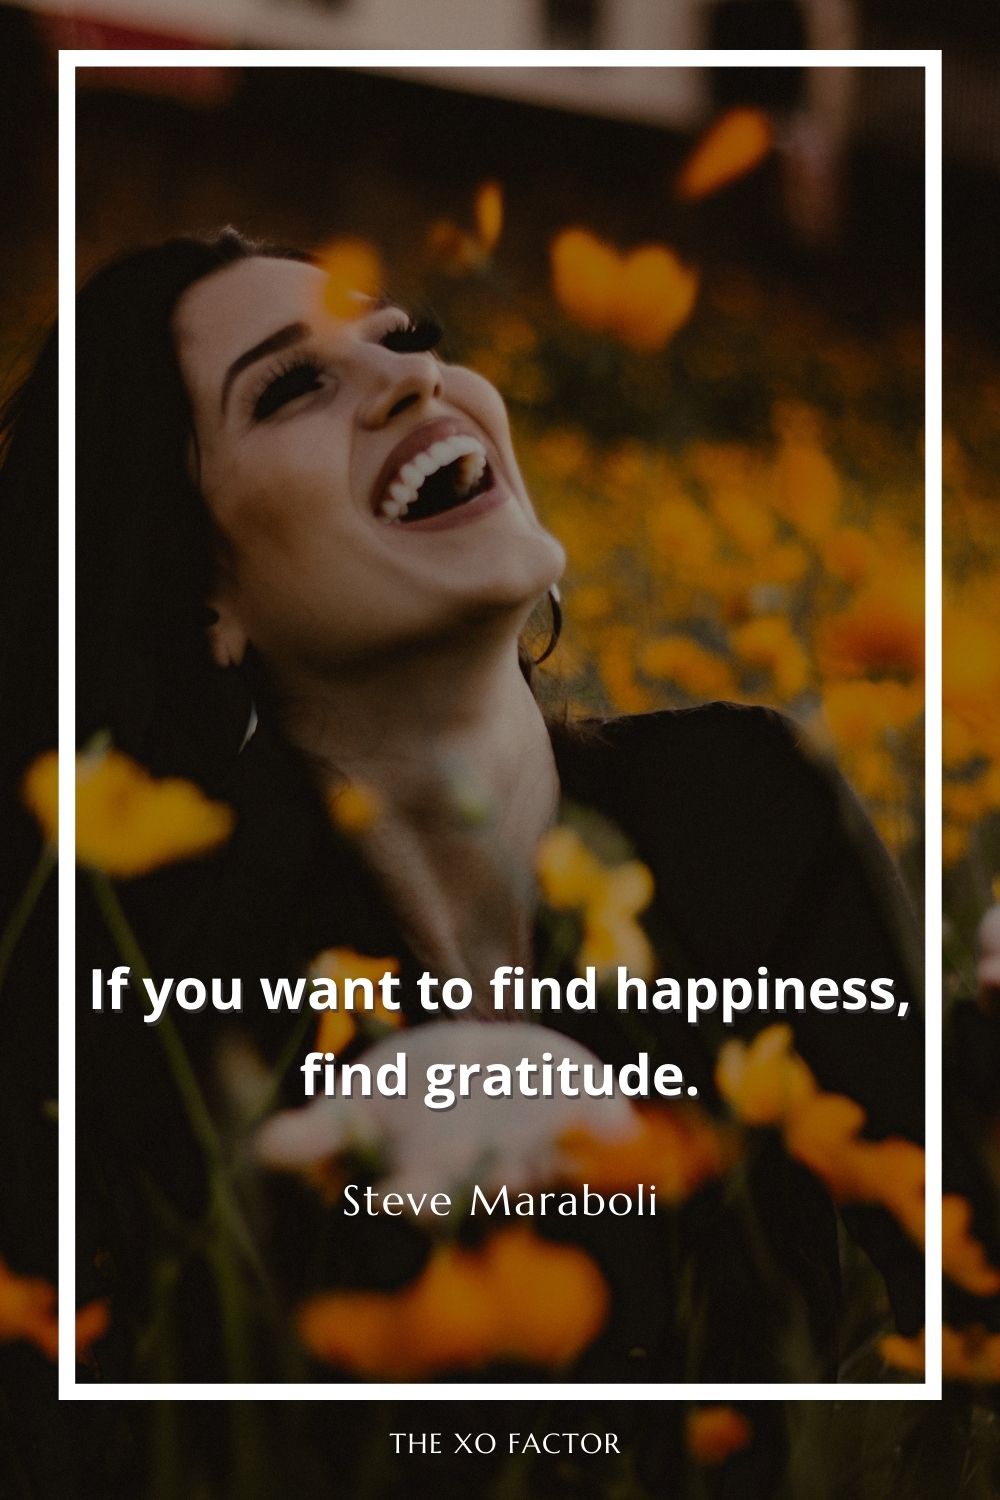 If you want to find happiness, find gratitude.